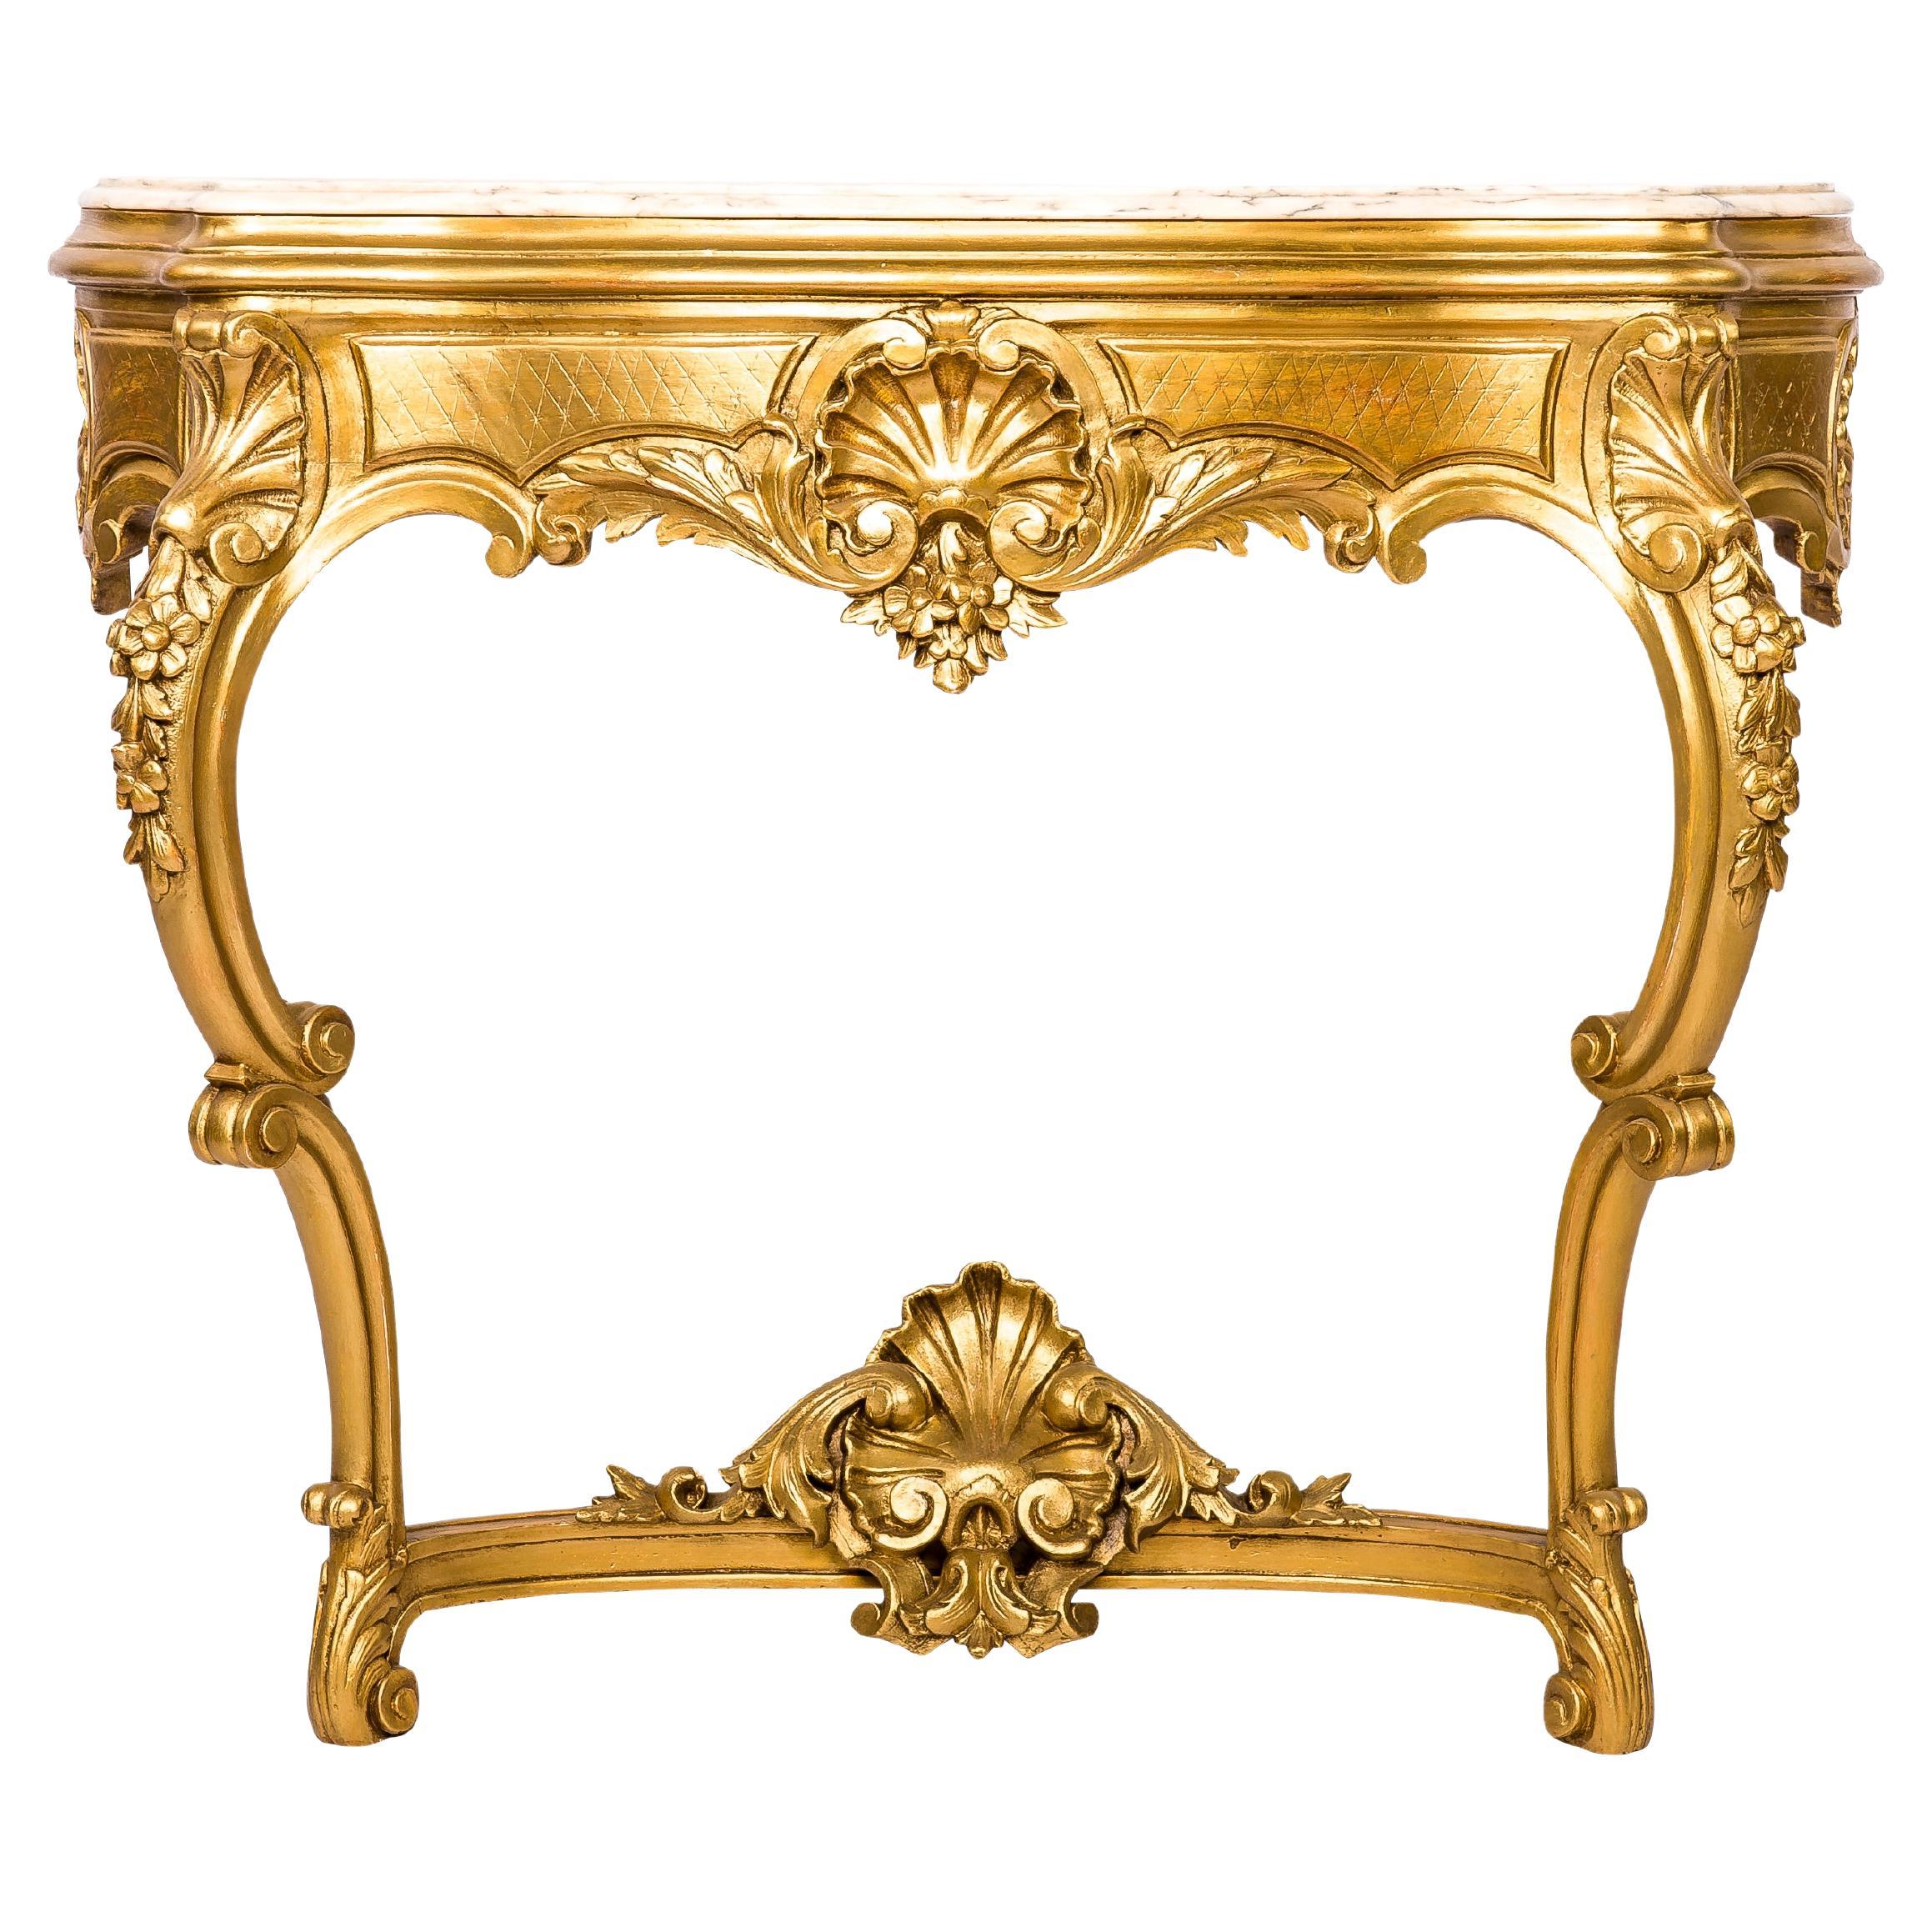 Antique 19th century French Gold Baroque Console Table,  Bianca Rosa Marble Top For Sale